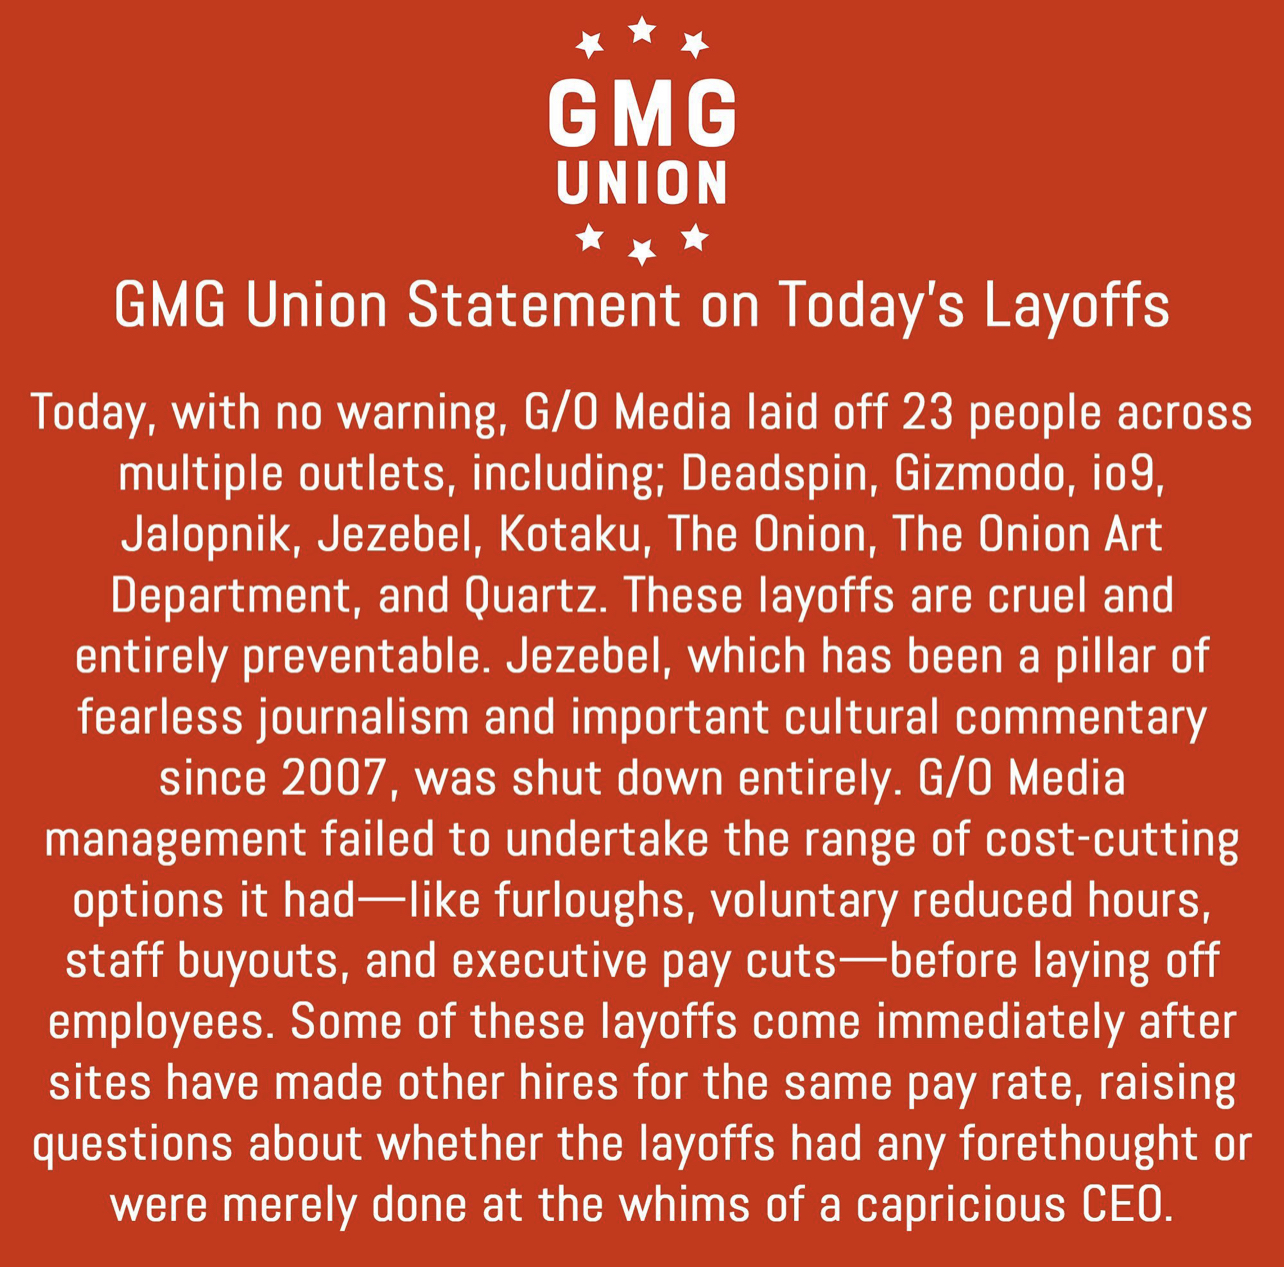 GMG Union Statement on Today's Layoffs Today, with no warning, G/O Media laid off 23 people across multiple outlets, including; Deadspin, Gizmodo, io9, Jalopnik, Jezebel, Kotaku, The Onion, The Onion Art Department, and Quartz. These layoffs are cruel and entirely preventable. Jezebel, which has been a pillar of fearless journalism and important cultural commentary since 2007, was shut down entirely. G/O Media management failed to undertake the range of cost cutting options it had -like furloughs, voluntary reduced hours, staff buyouts, and executive pay cuts--before laying off employees. Some of these layoffs come immediately after sites have made other hires for the same pay rate, raising questions about whether the layoffs had any forethought or were merely done at the whims of a capricious CEO.